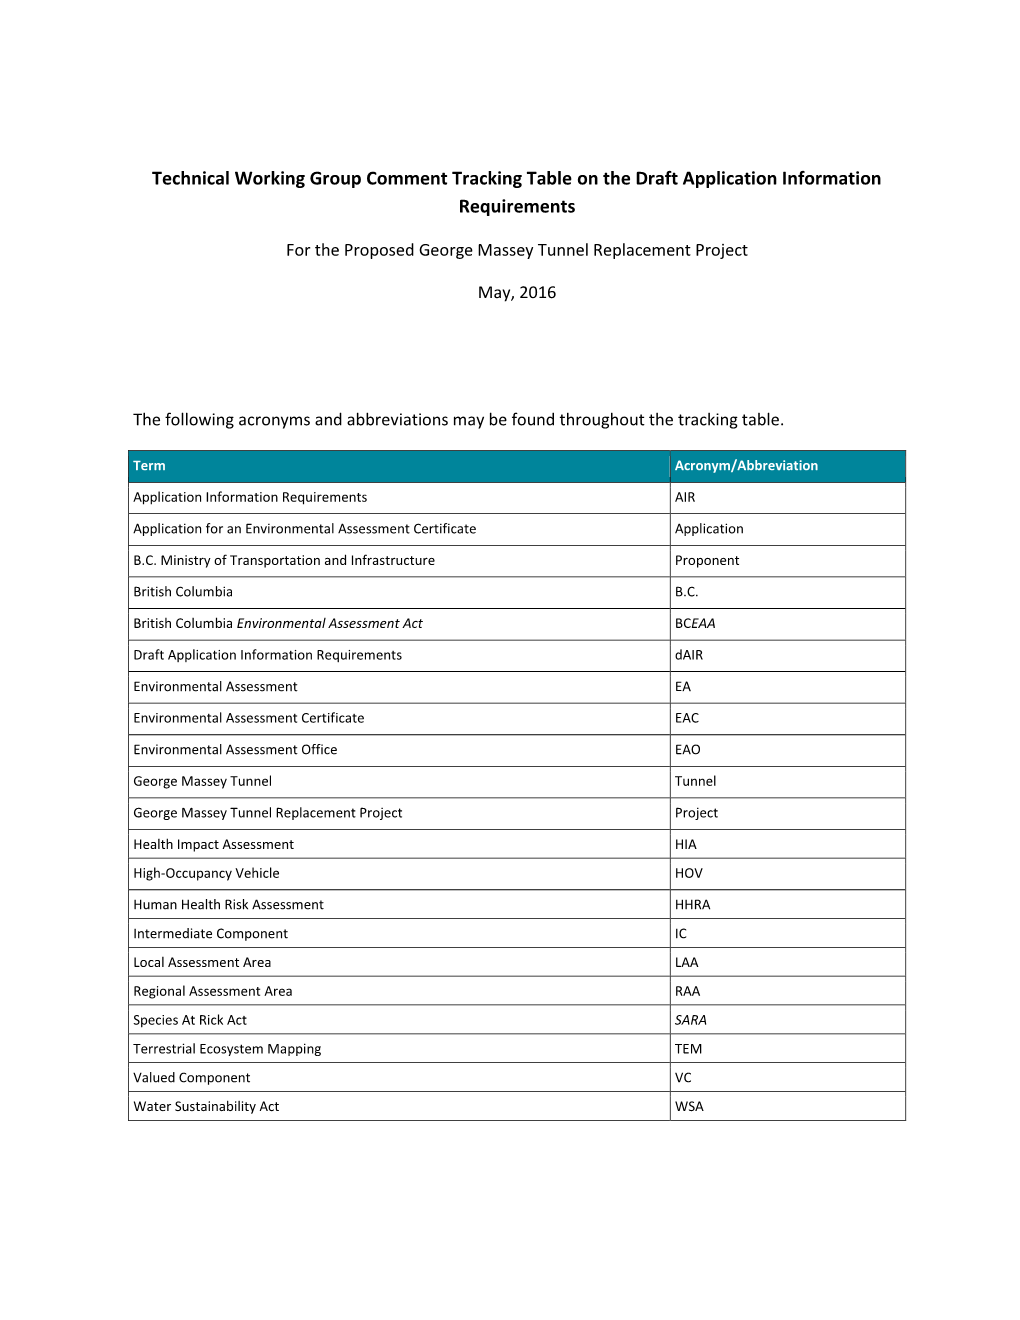 Technical Working Group Comment Tracking Table on the Draft Application Information Requirements